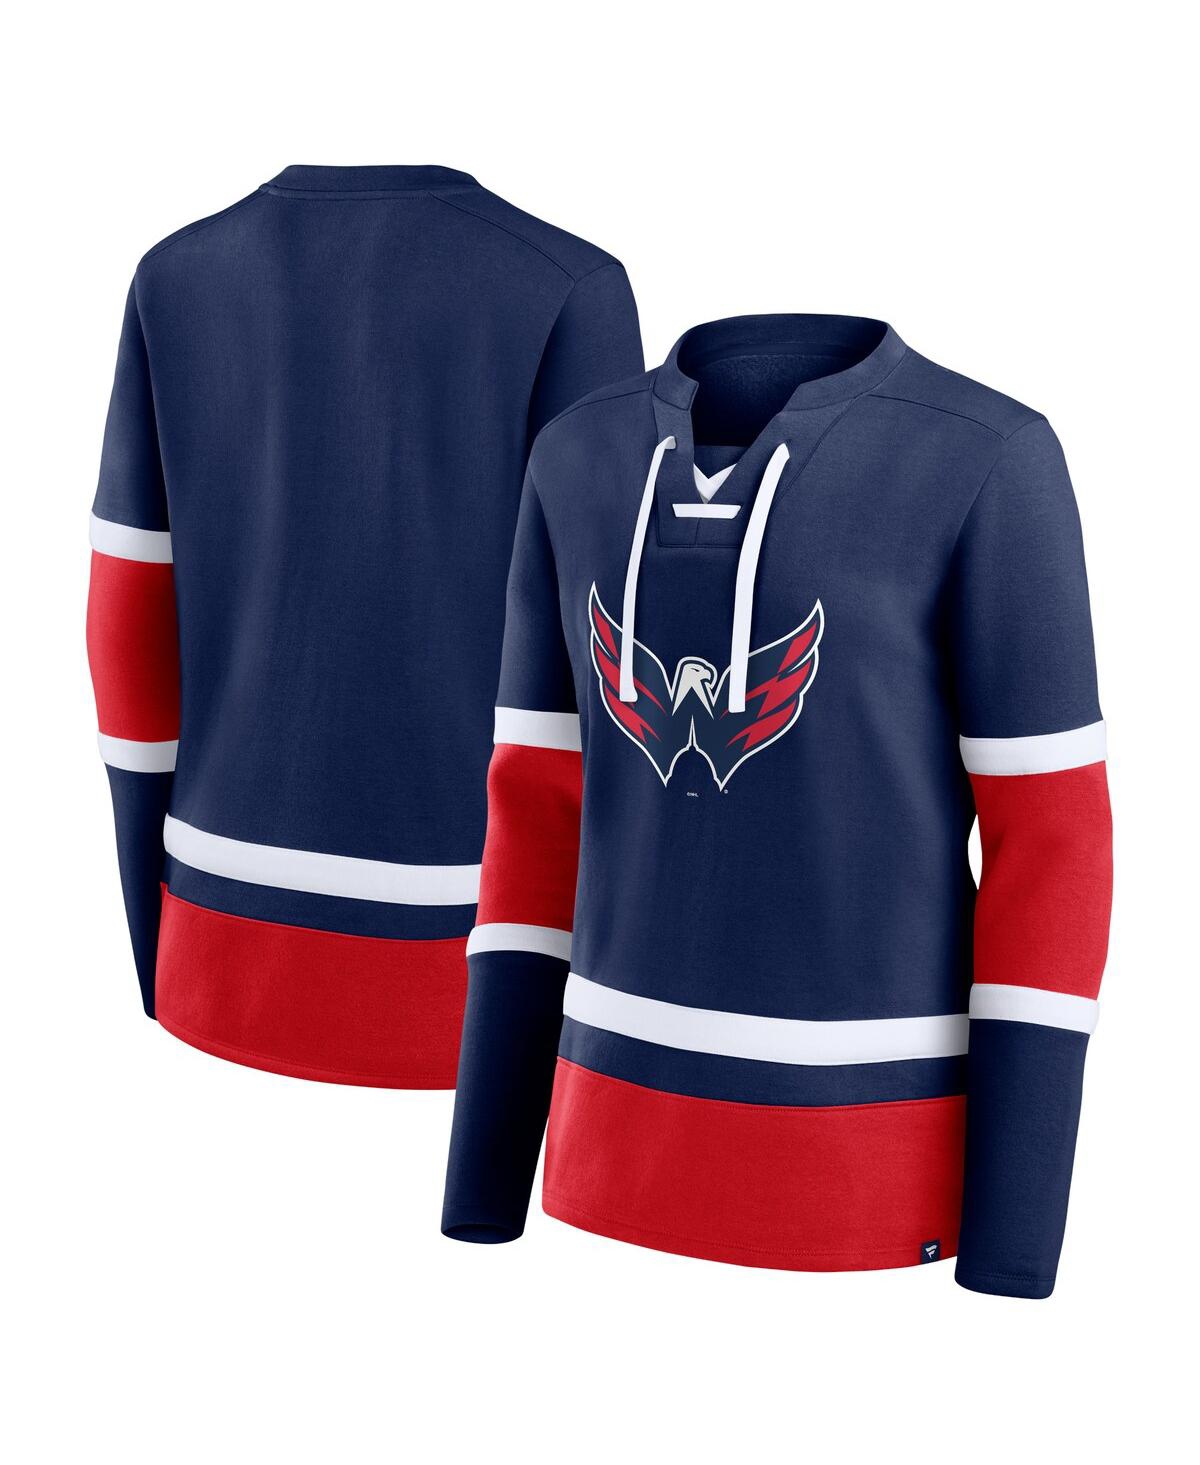 Fanatics Women's  Navy, Red Washington Capitals Top Speed Lace-up Pullover Sweatshirt In Navy,red